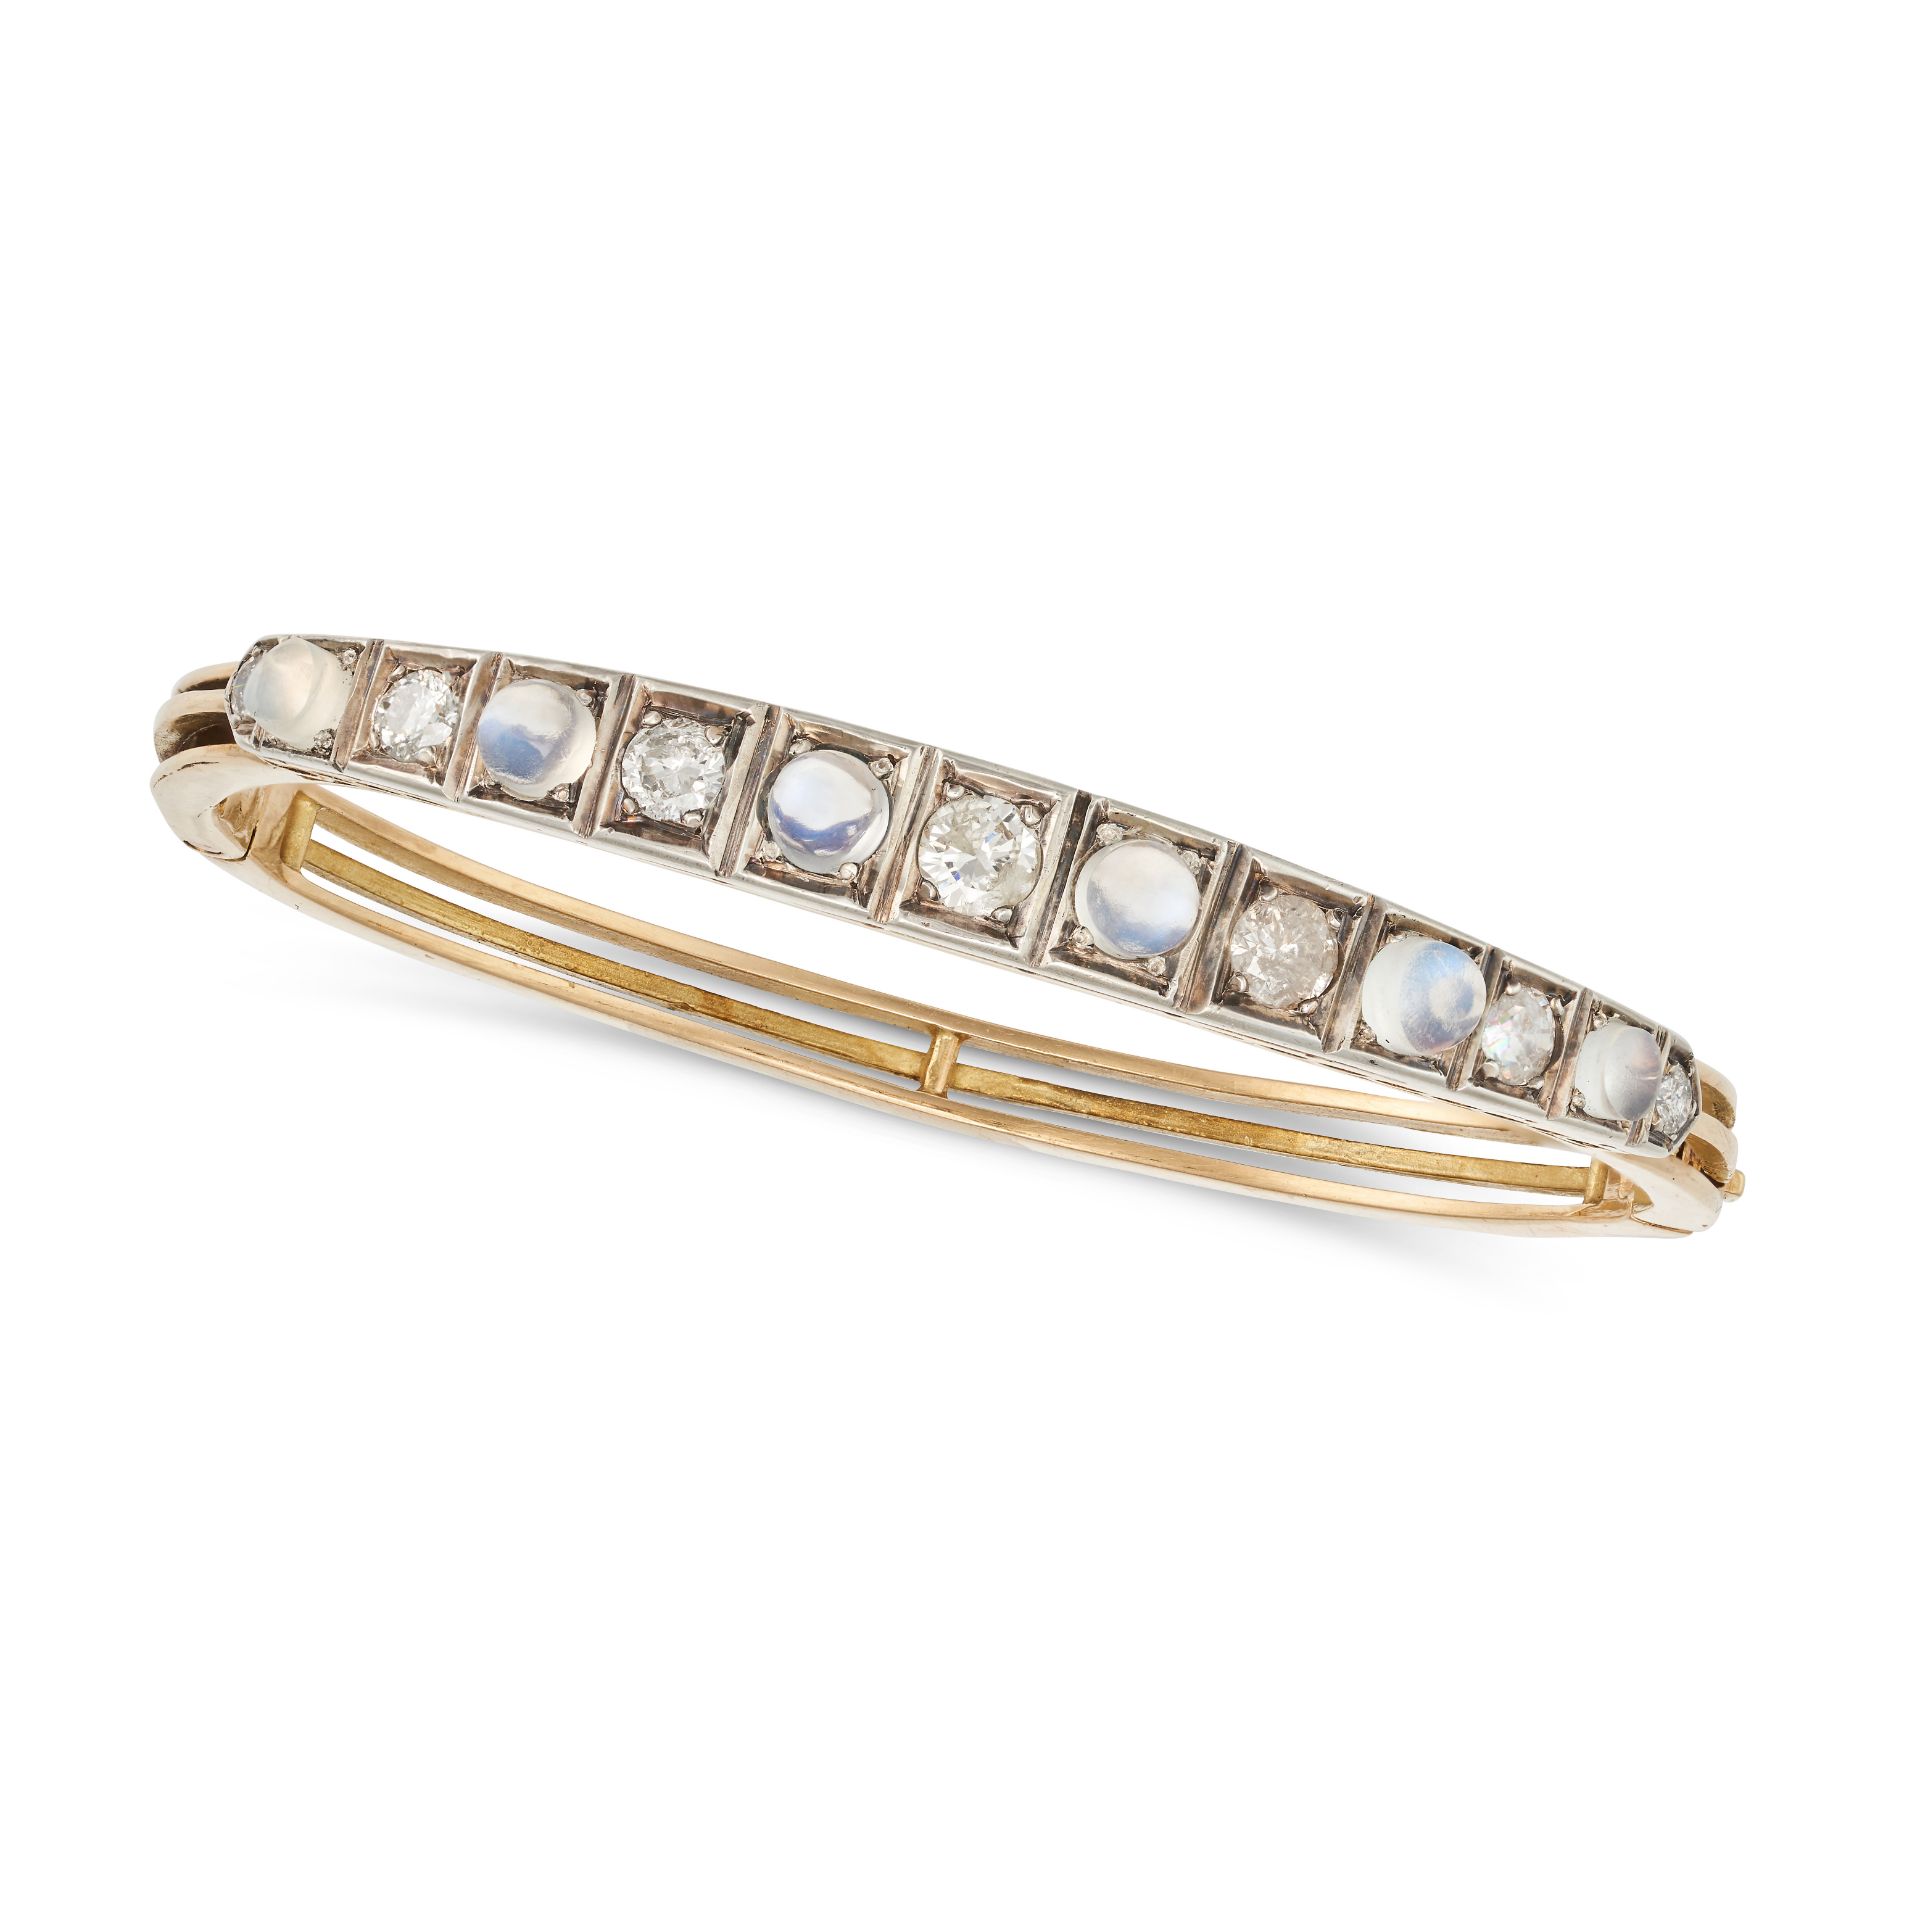 A MOONSTONE AND DIAMOND BANGLE the hinged bangle set with a row of alternating round cabochon moo...